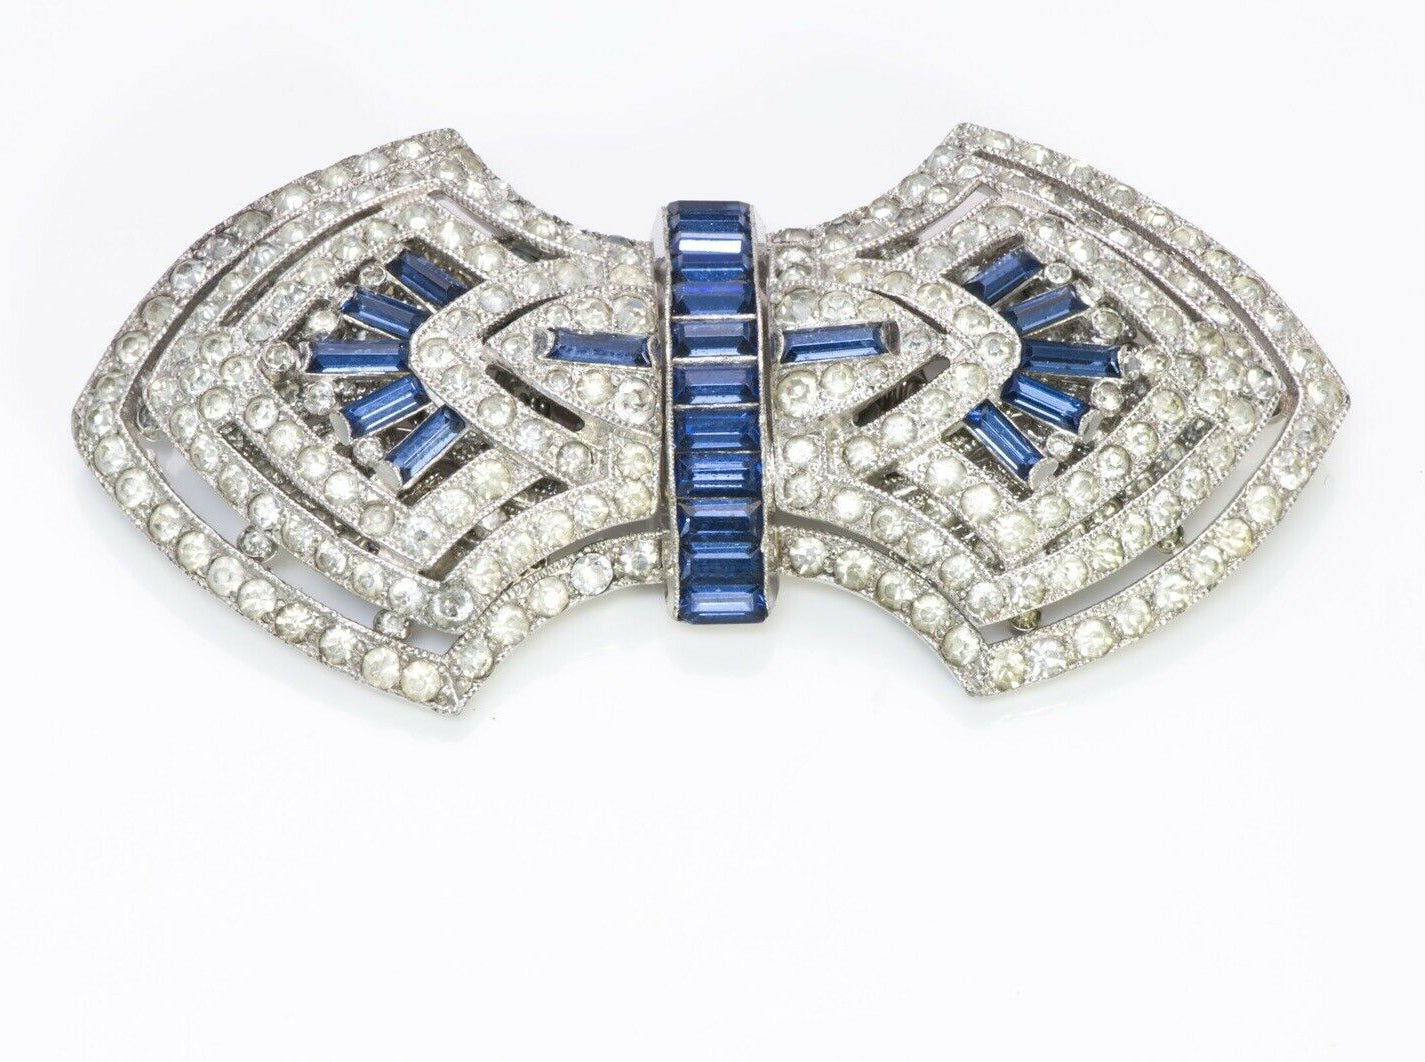 Coro Duette 1940’s Art Deco Style Blue Crystal Clips Brooch